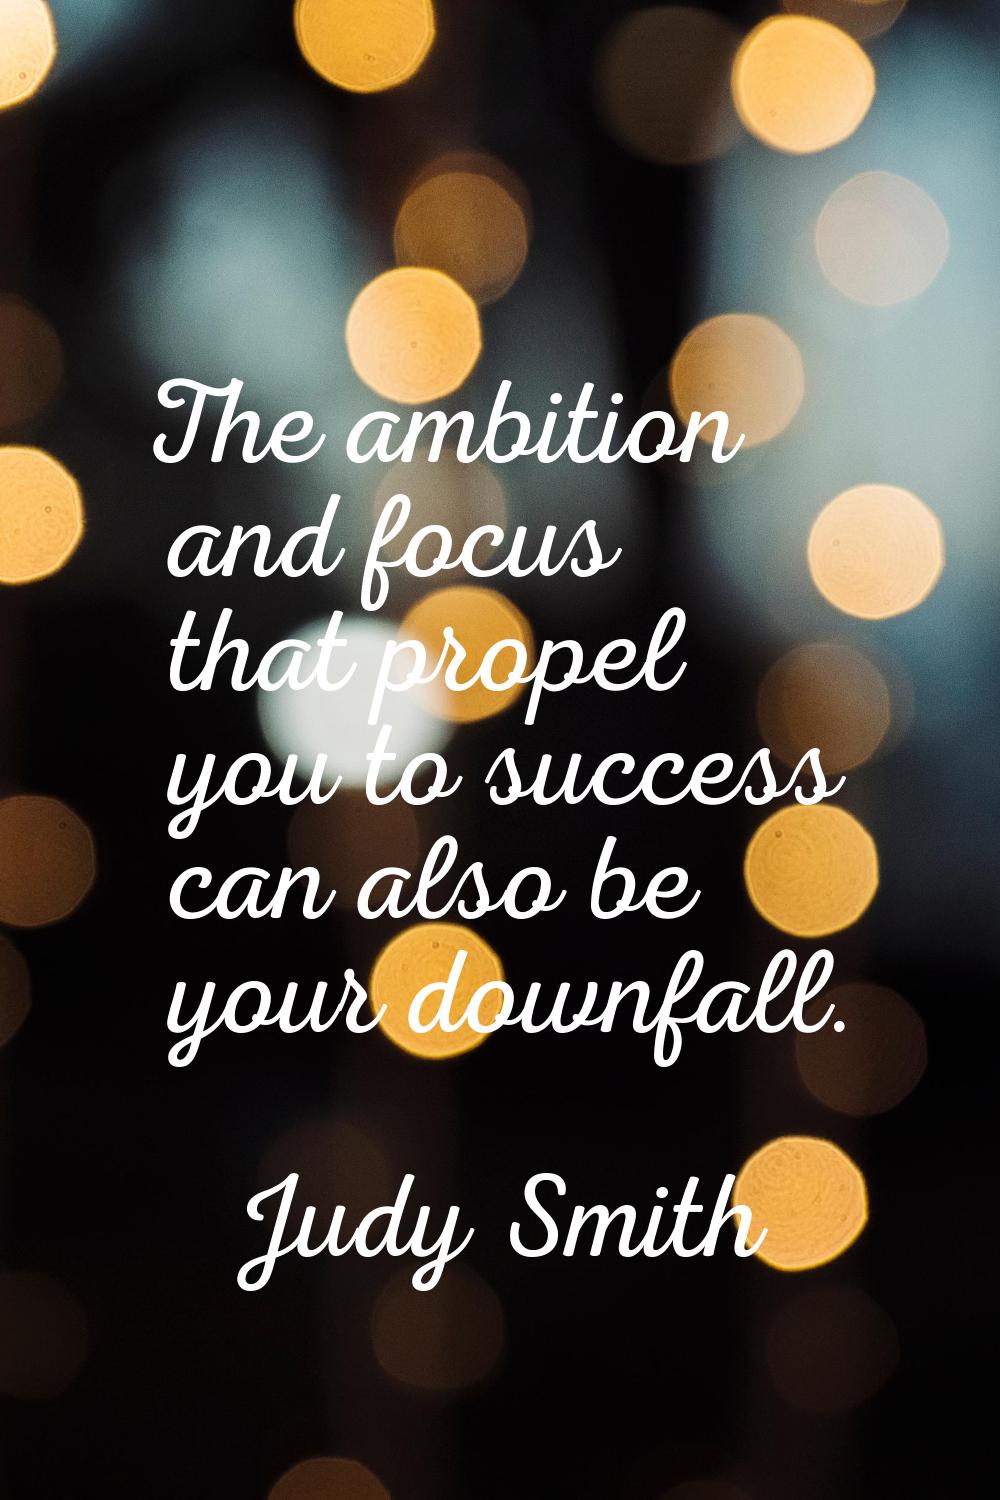 The ambition and focus that propel you to success can also be your downfall.